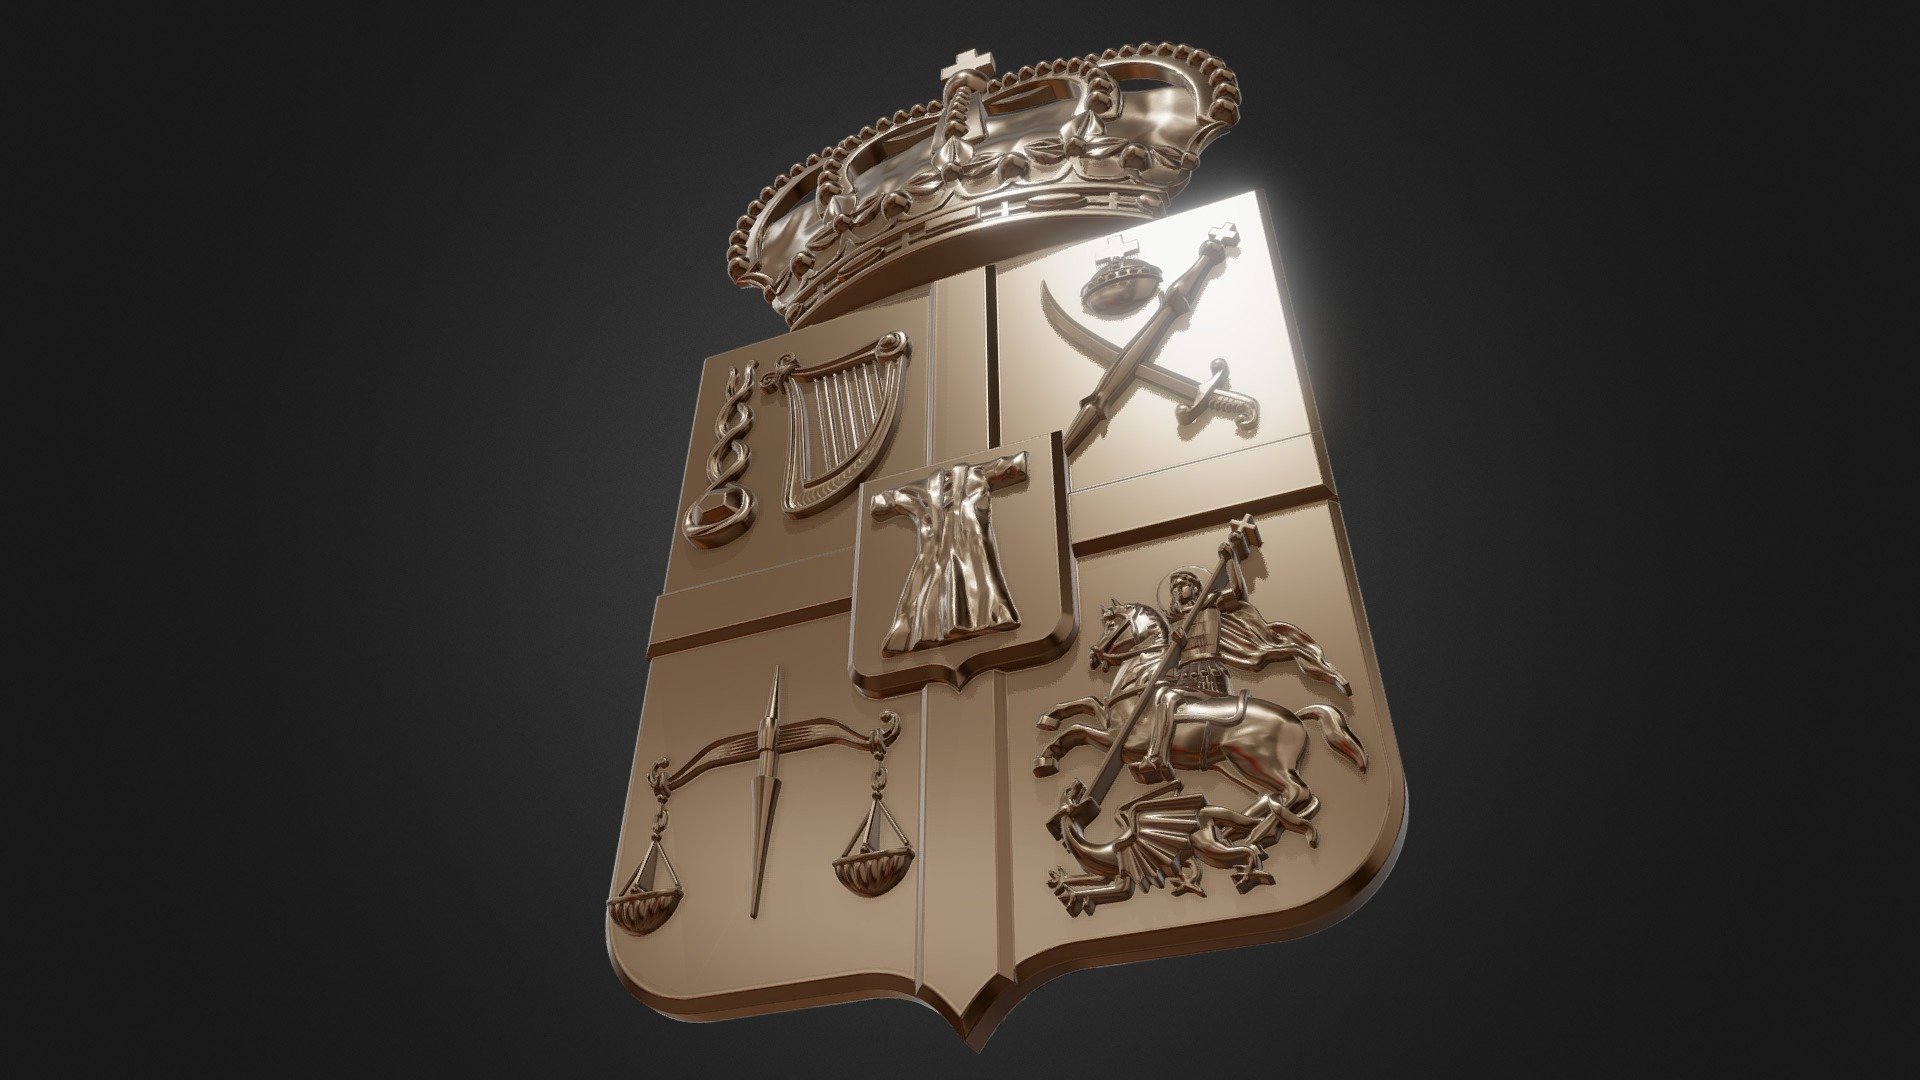 Coat of Arms made in Modo and Zbrush for metal casting purposes 3d model